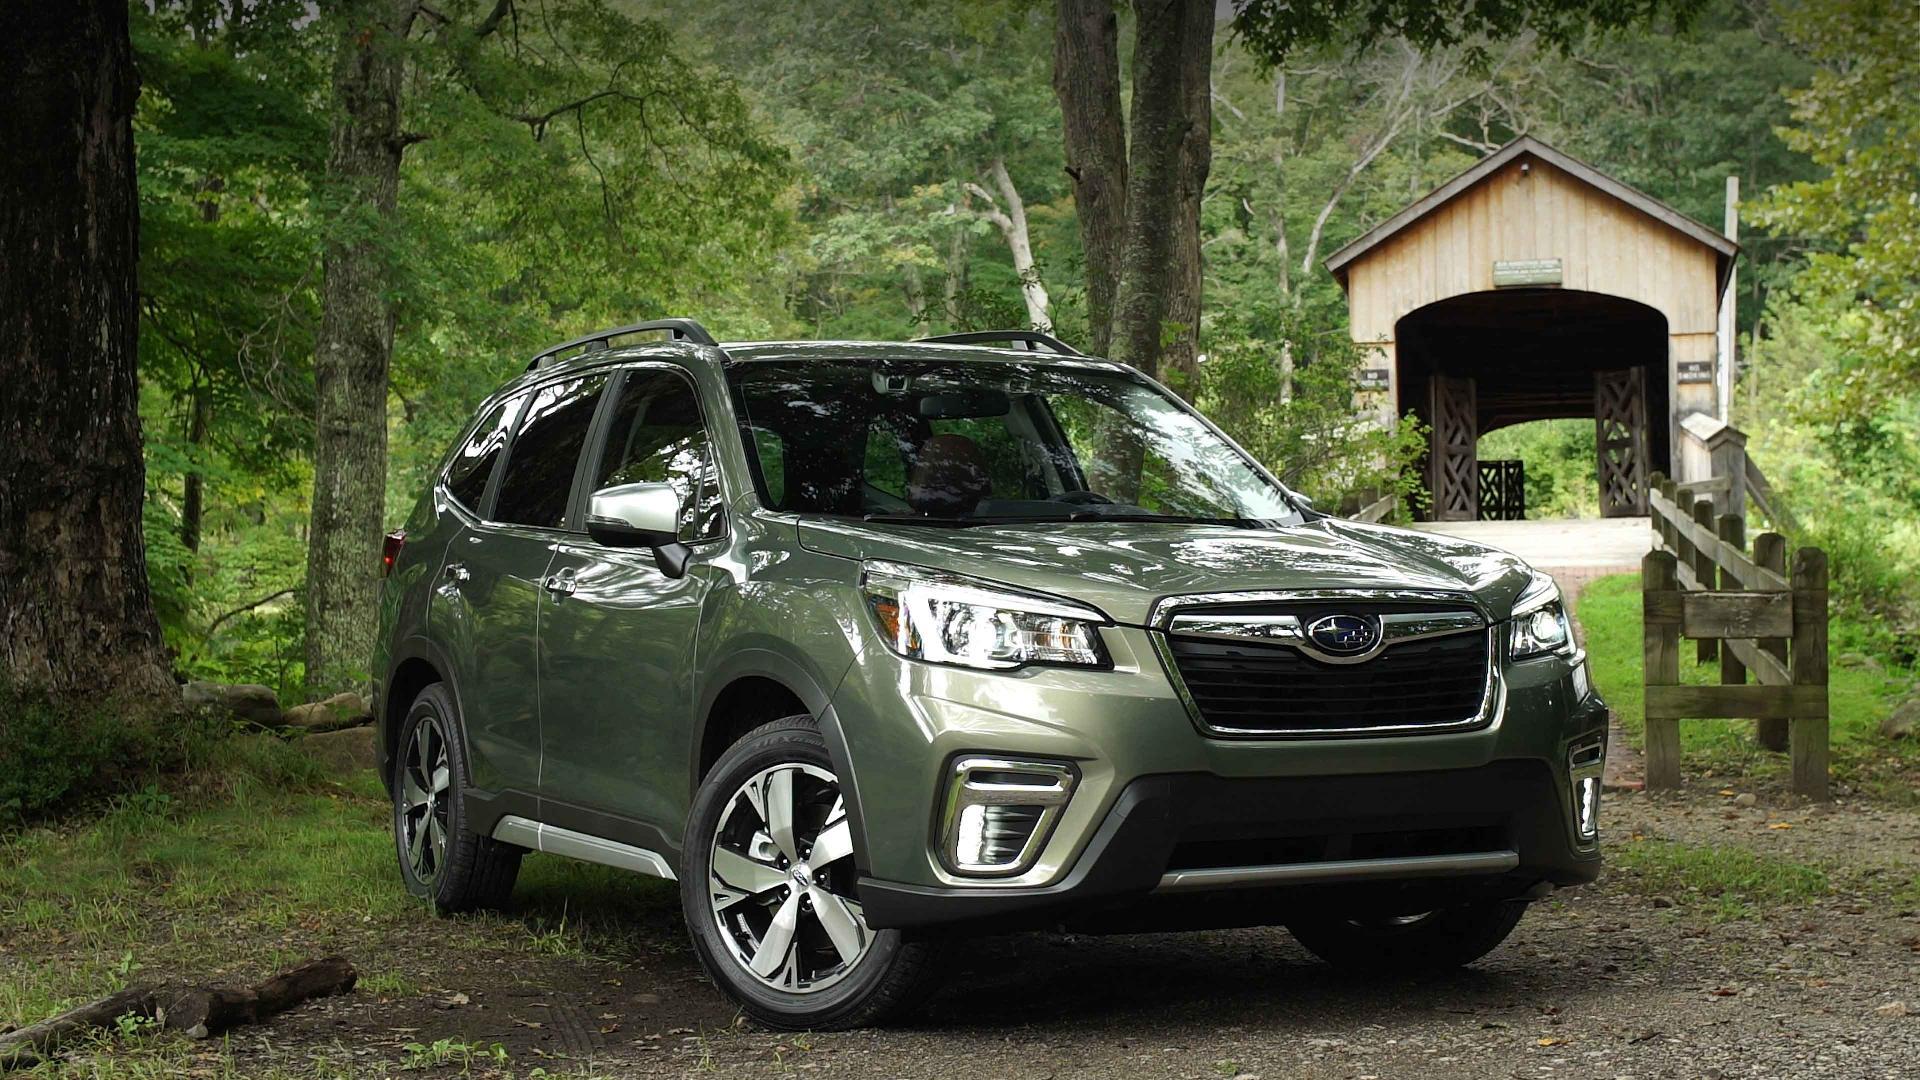 2019 Subaru Forester Improves Upon a Good Thing - Consumer Reports